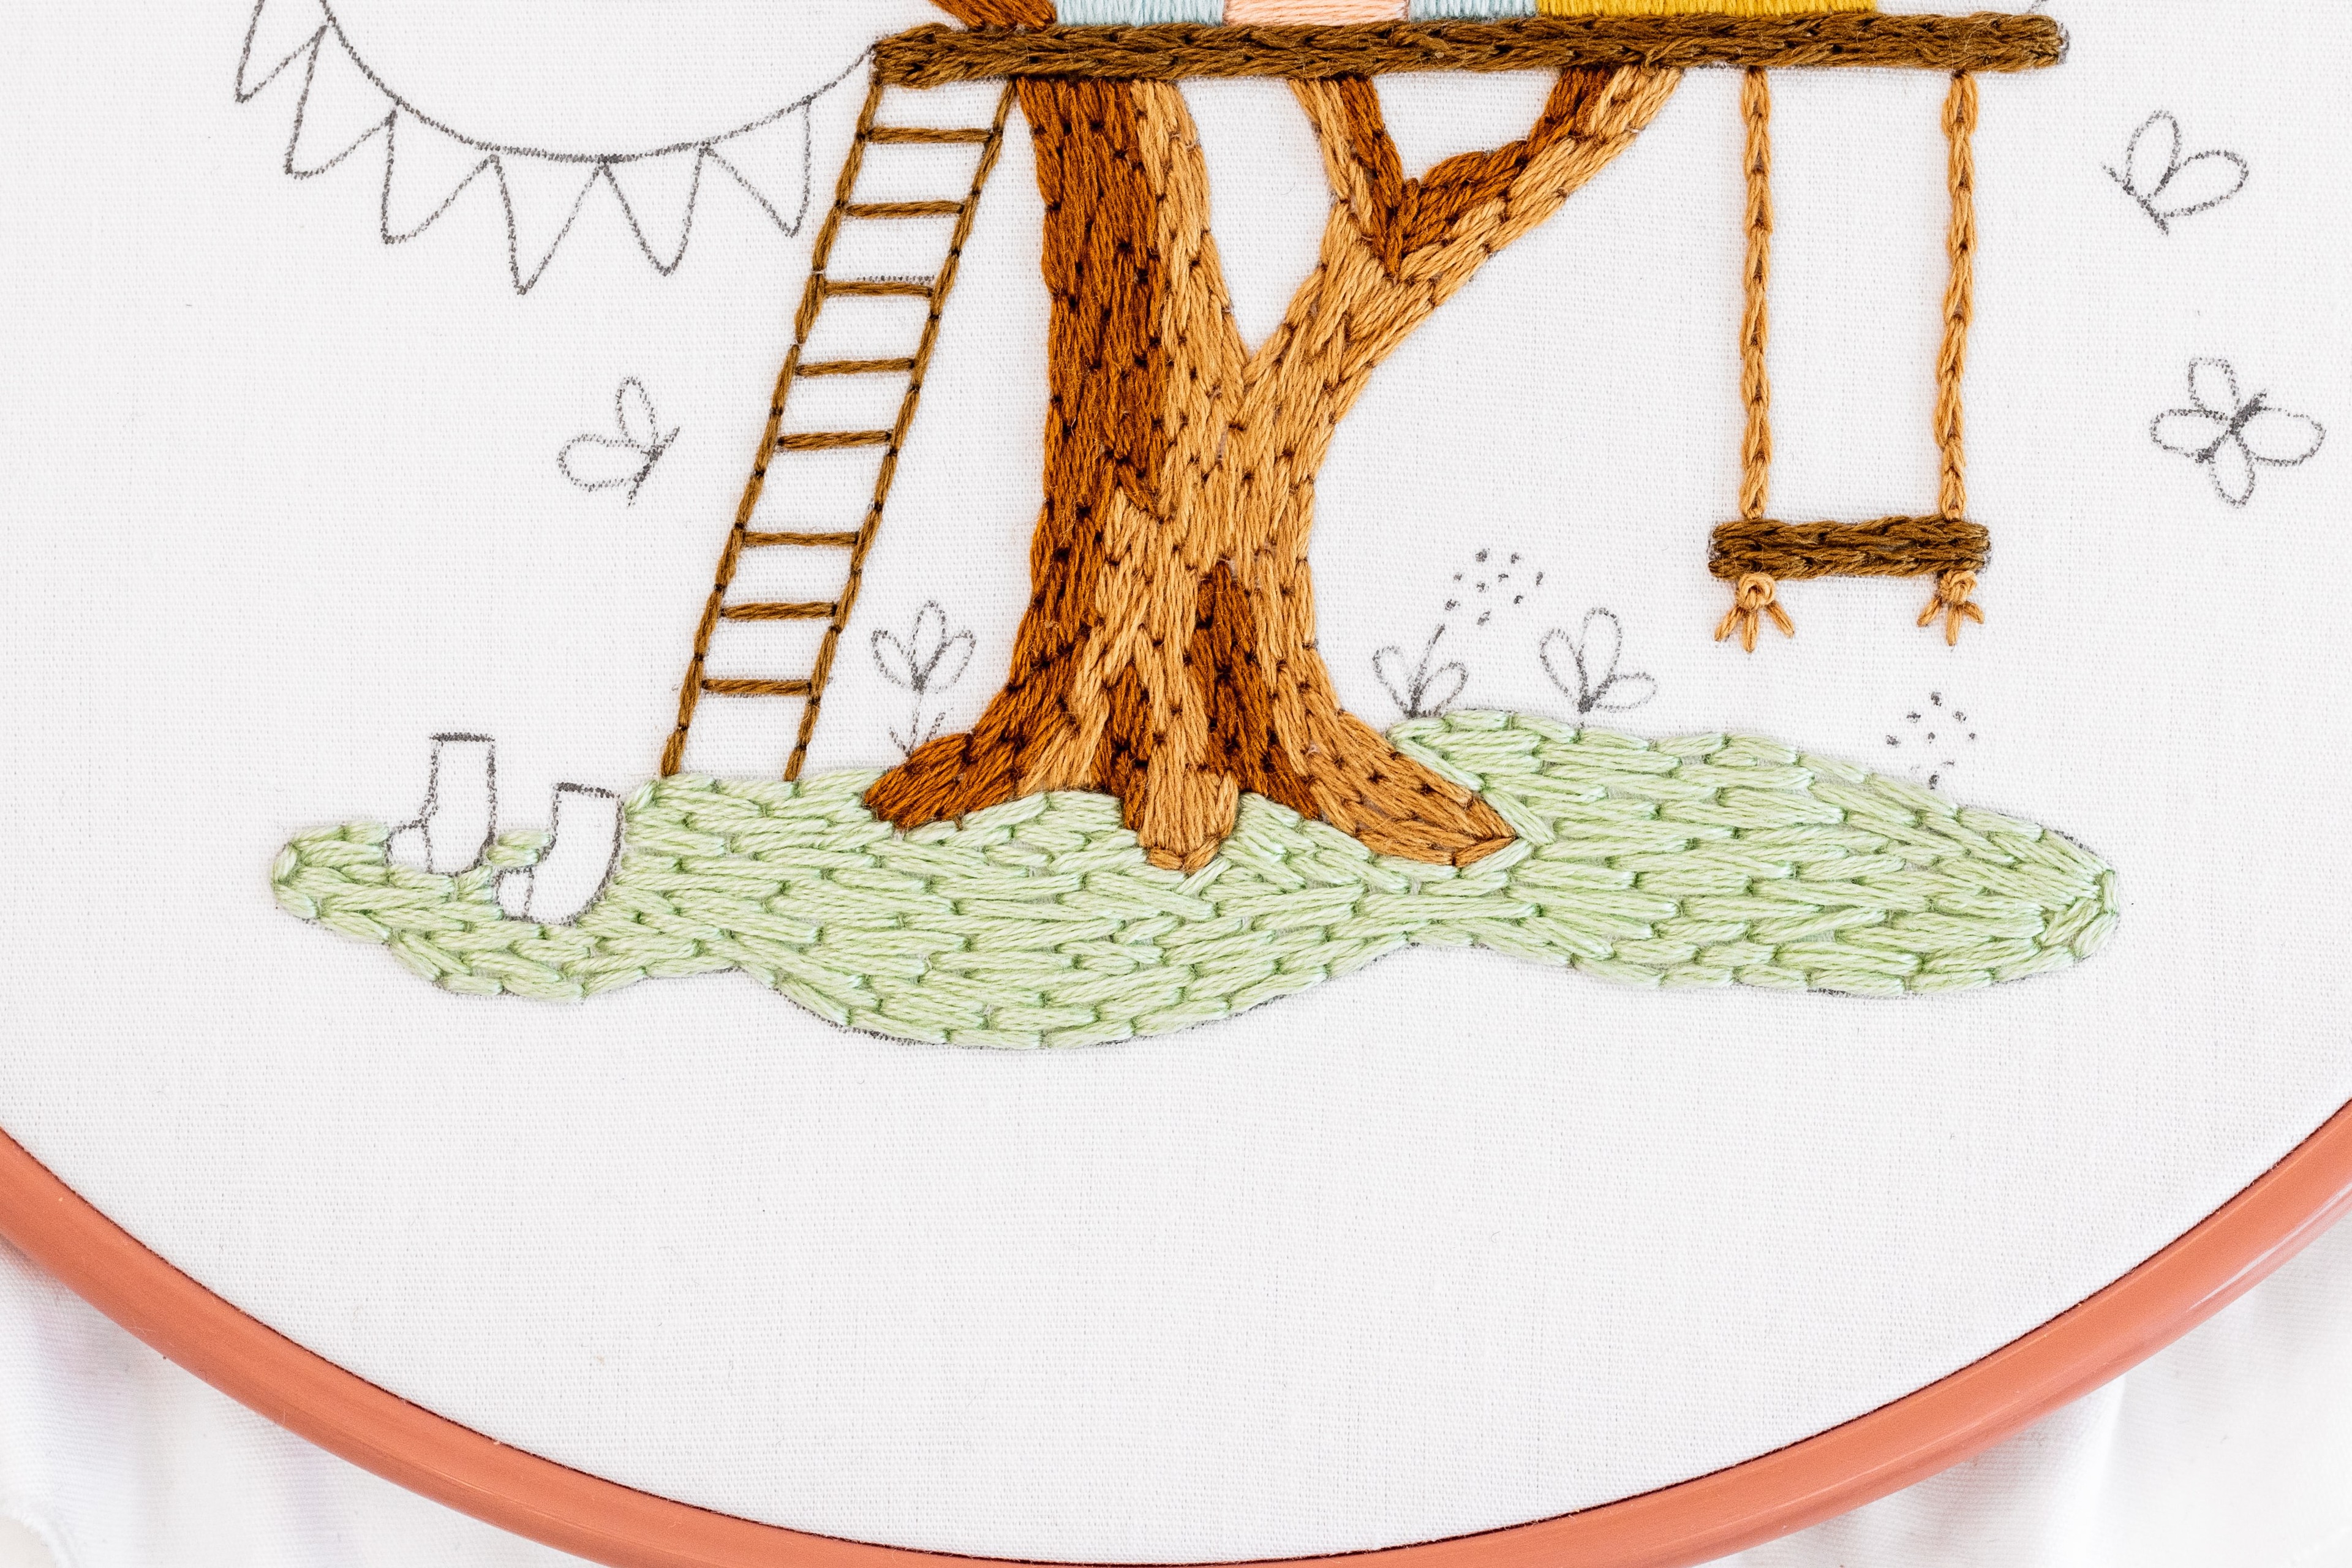 This is an image of the stitched grass in The Treehouse pattern by Clever Poppy.